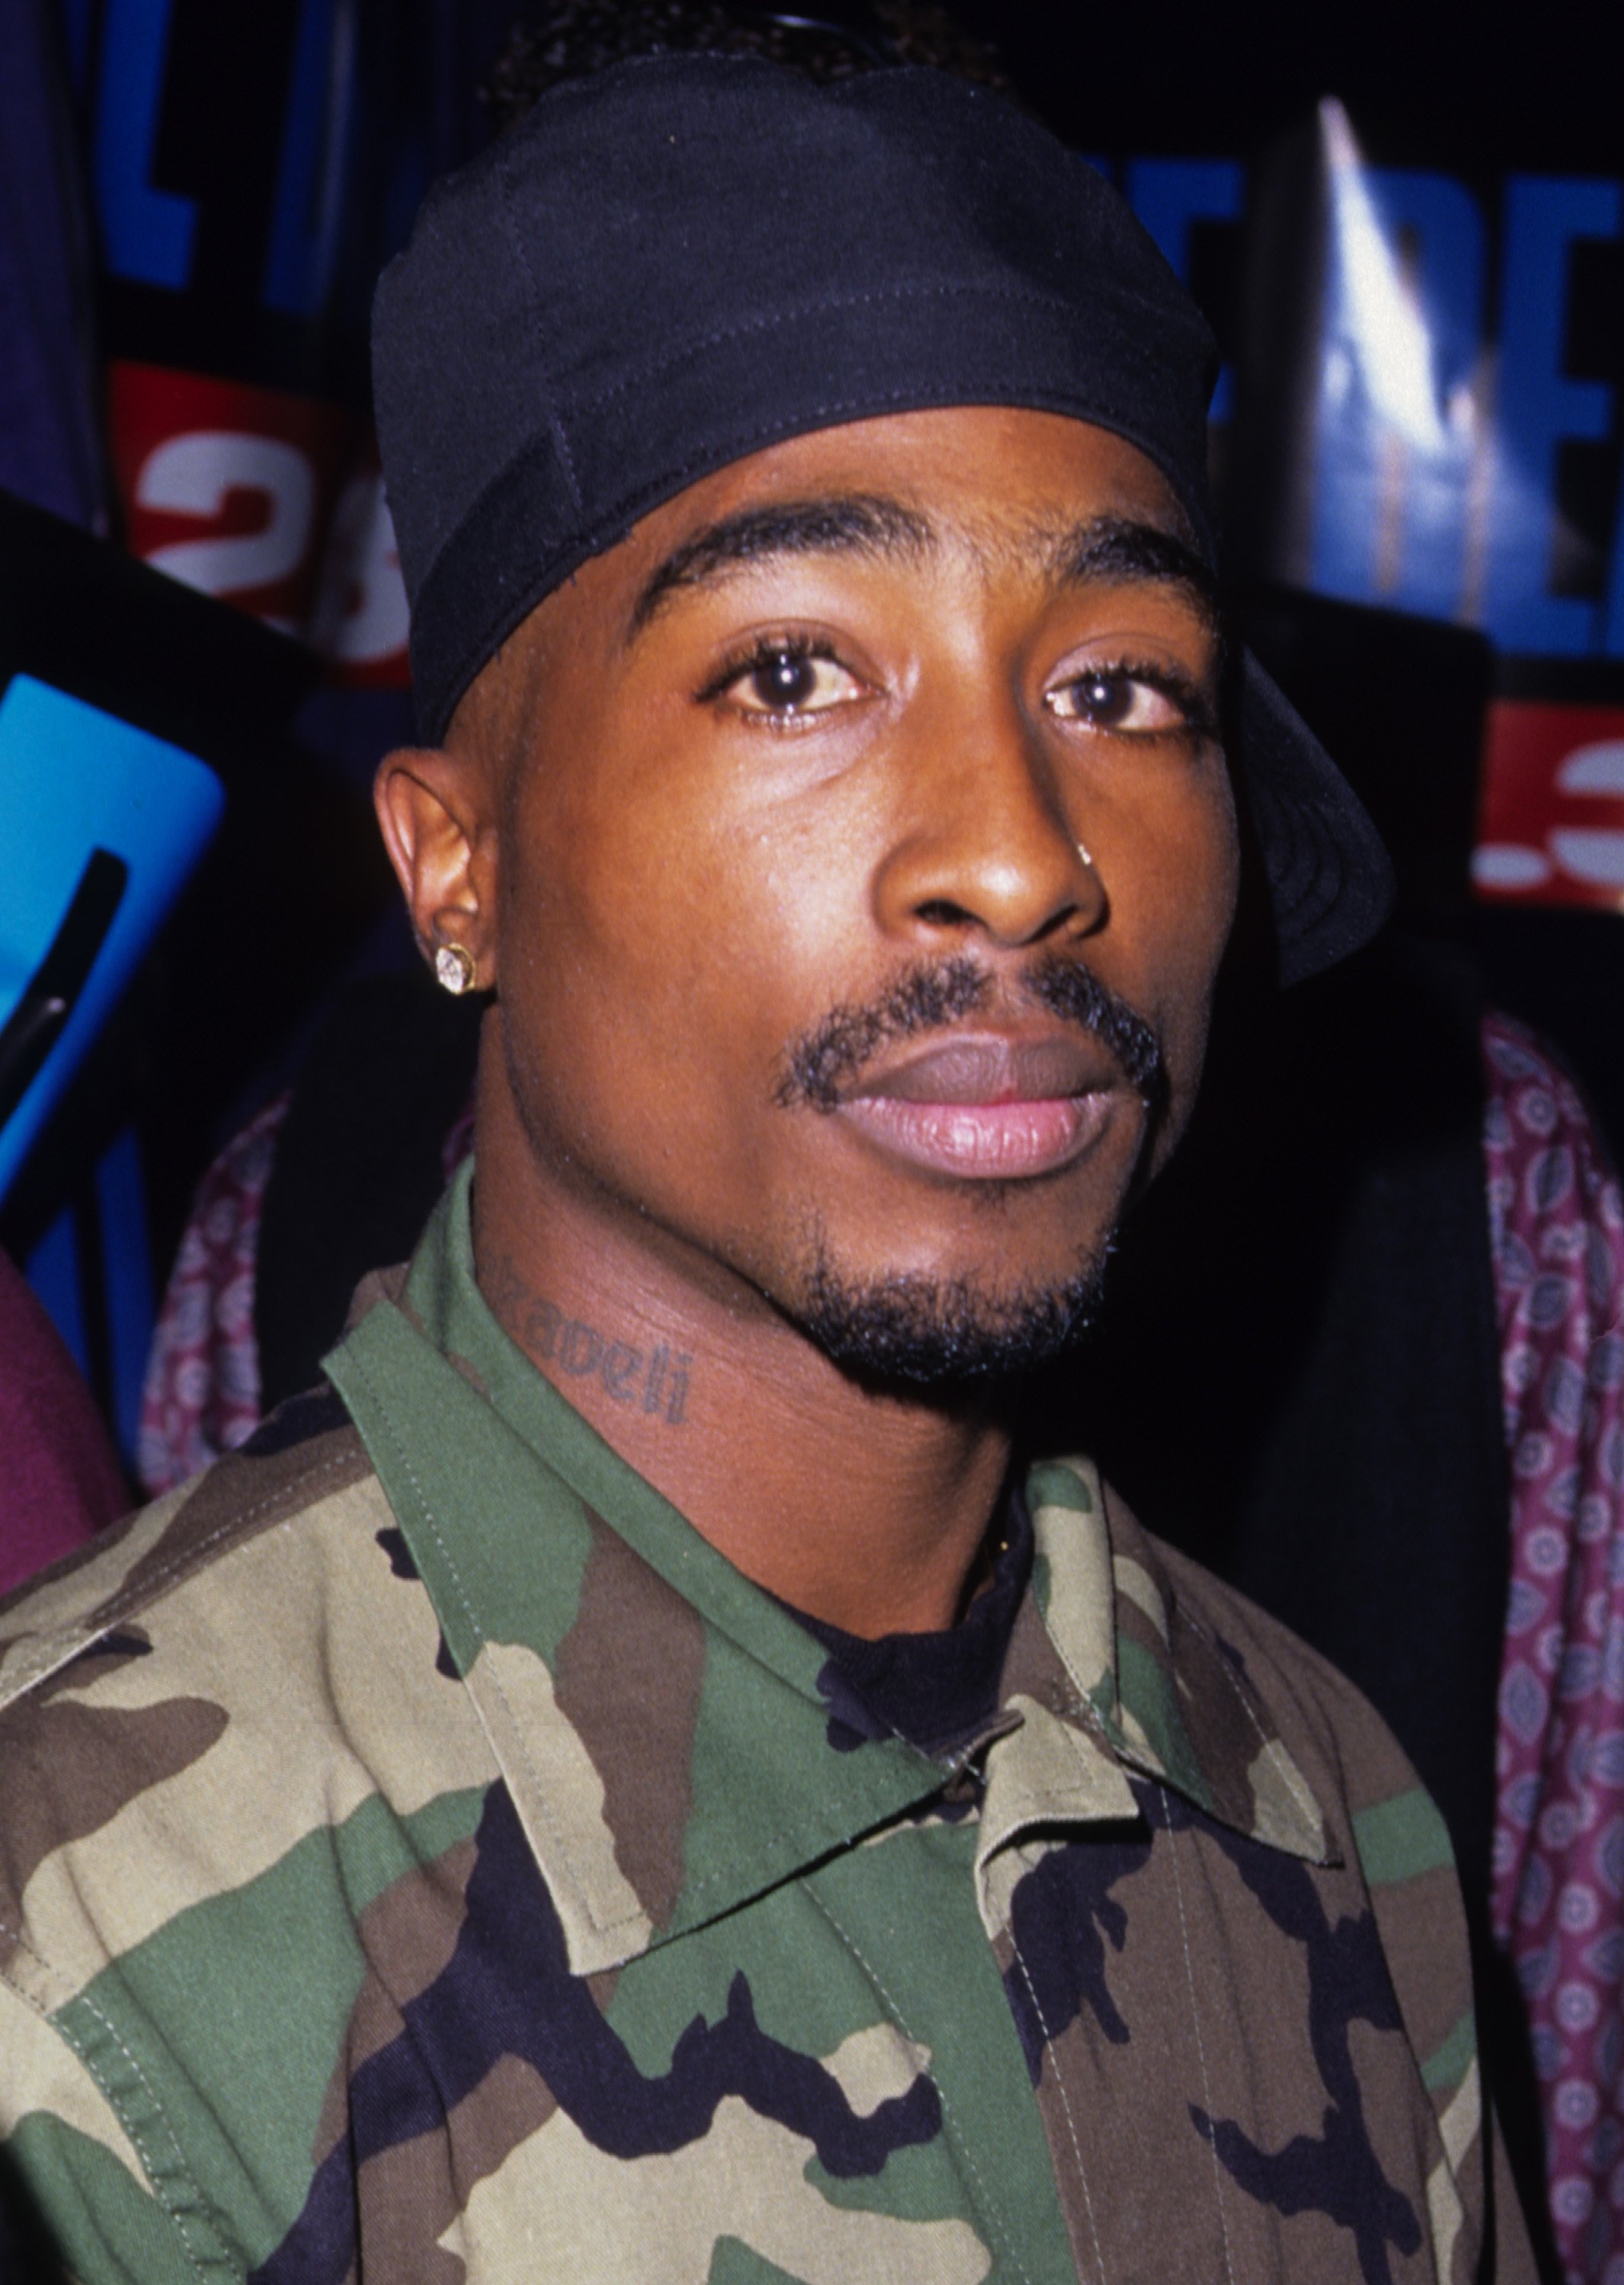 Tupac Shakur at the 10th Annual Soul Train Music Awards on March 29, 1996 at the Shrine Auditorium in Los Angeles, California. | Source: Getty Images